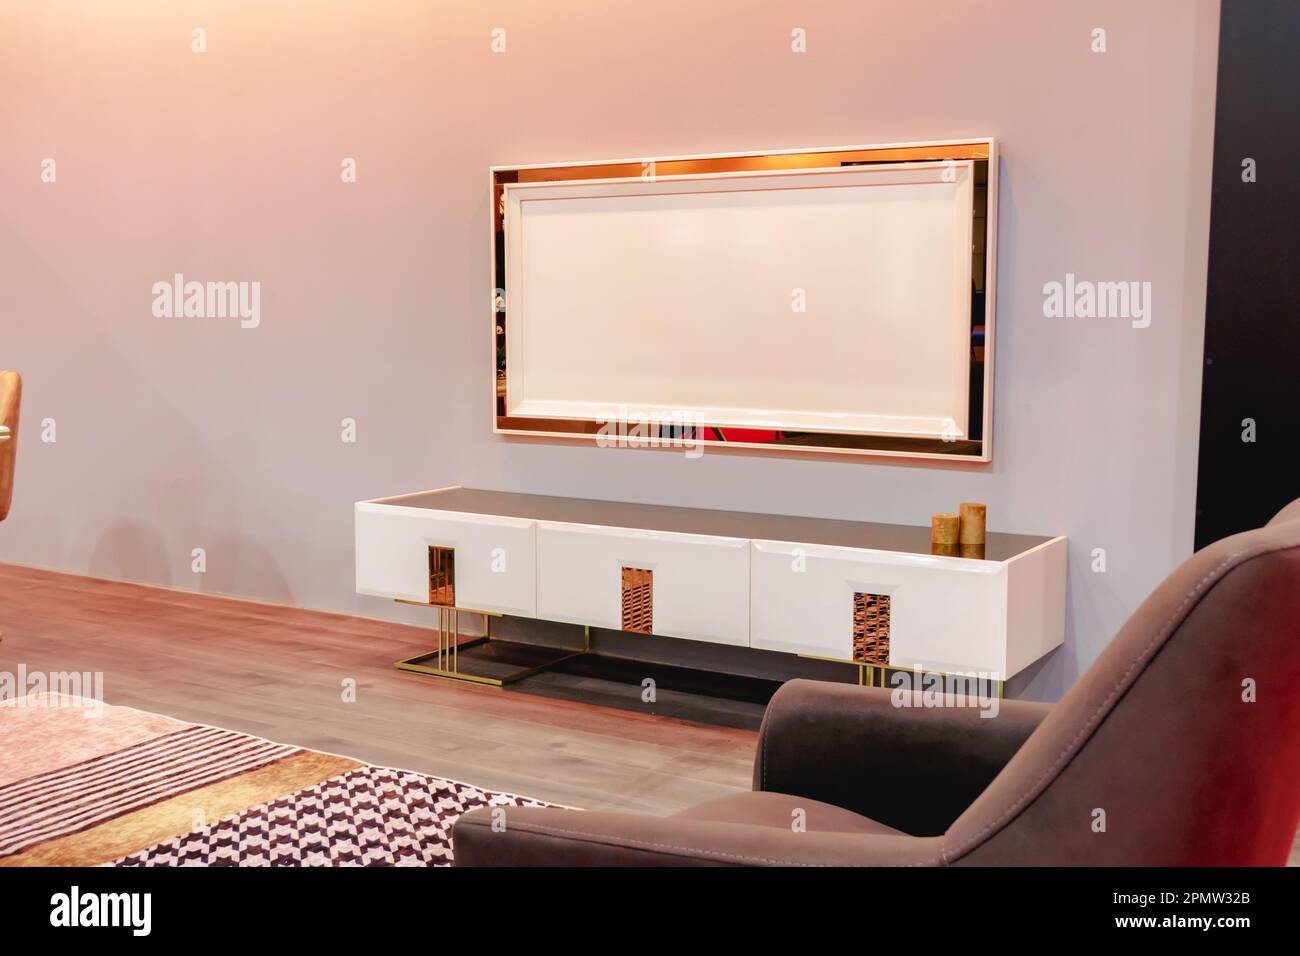 White and gold-plated TV cabinet in the interior of the room. Stock Photo